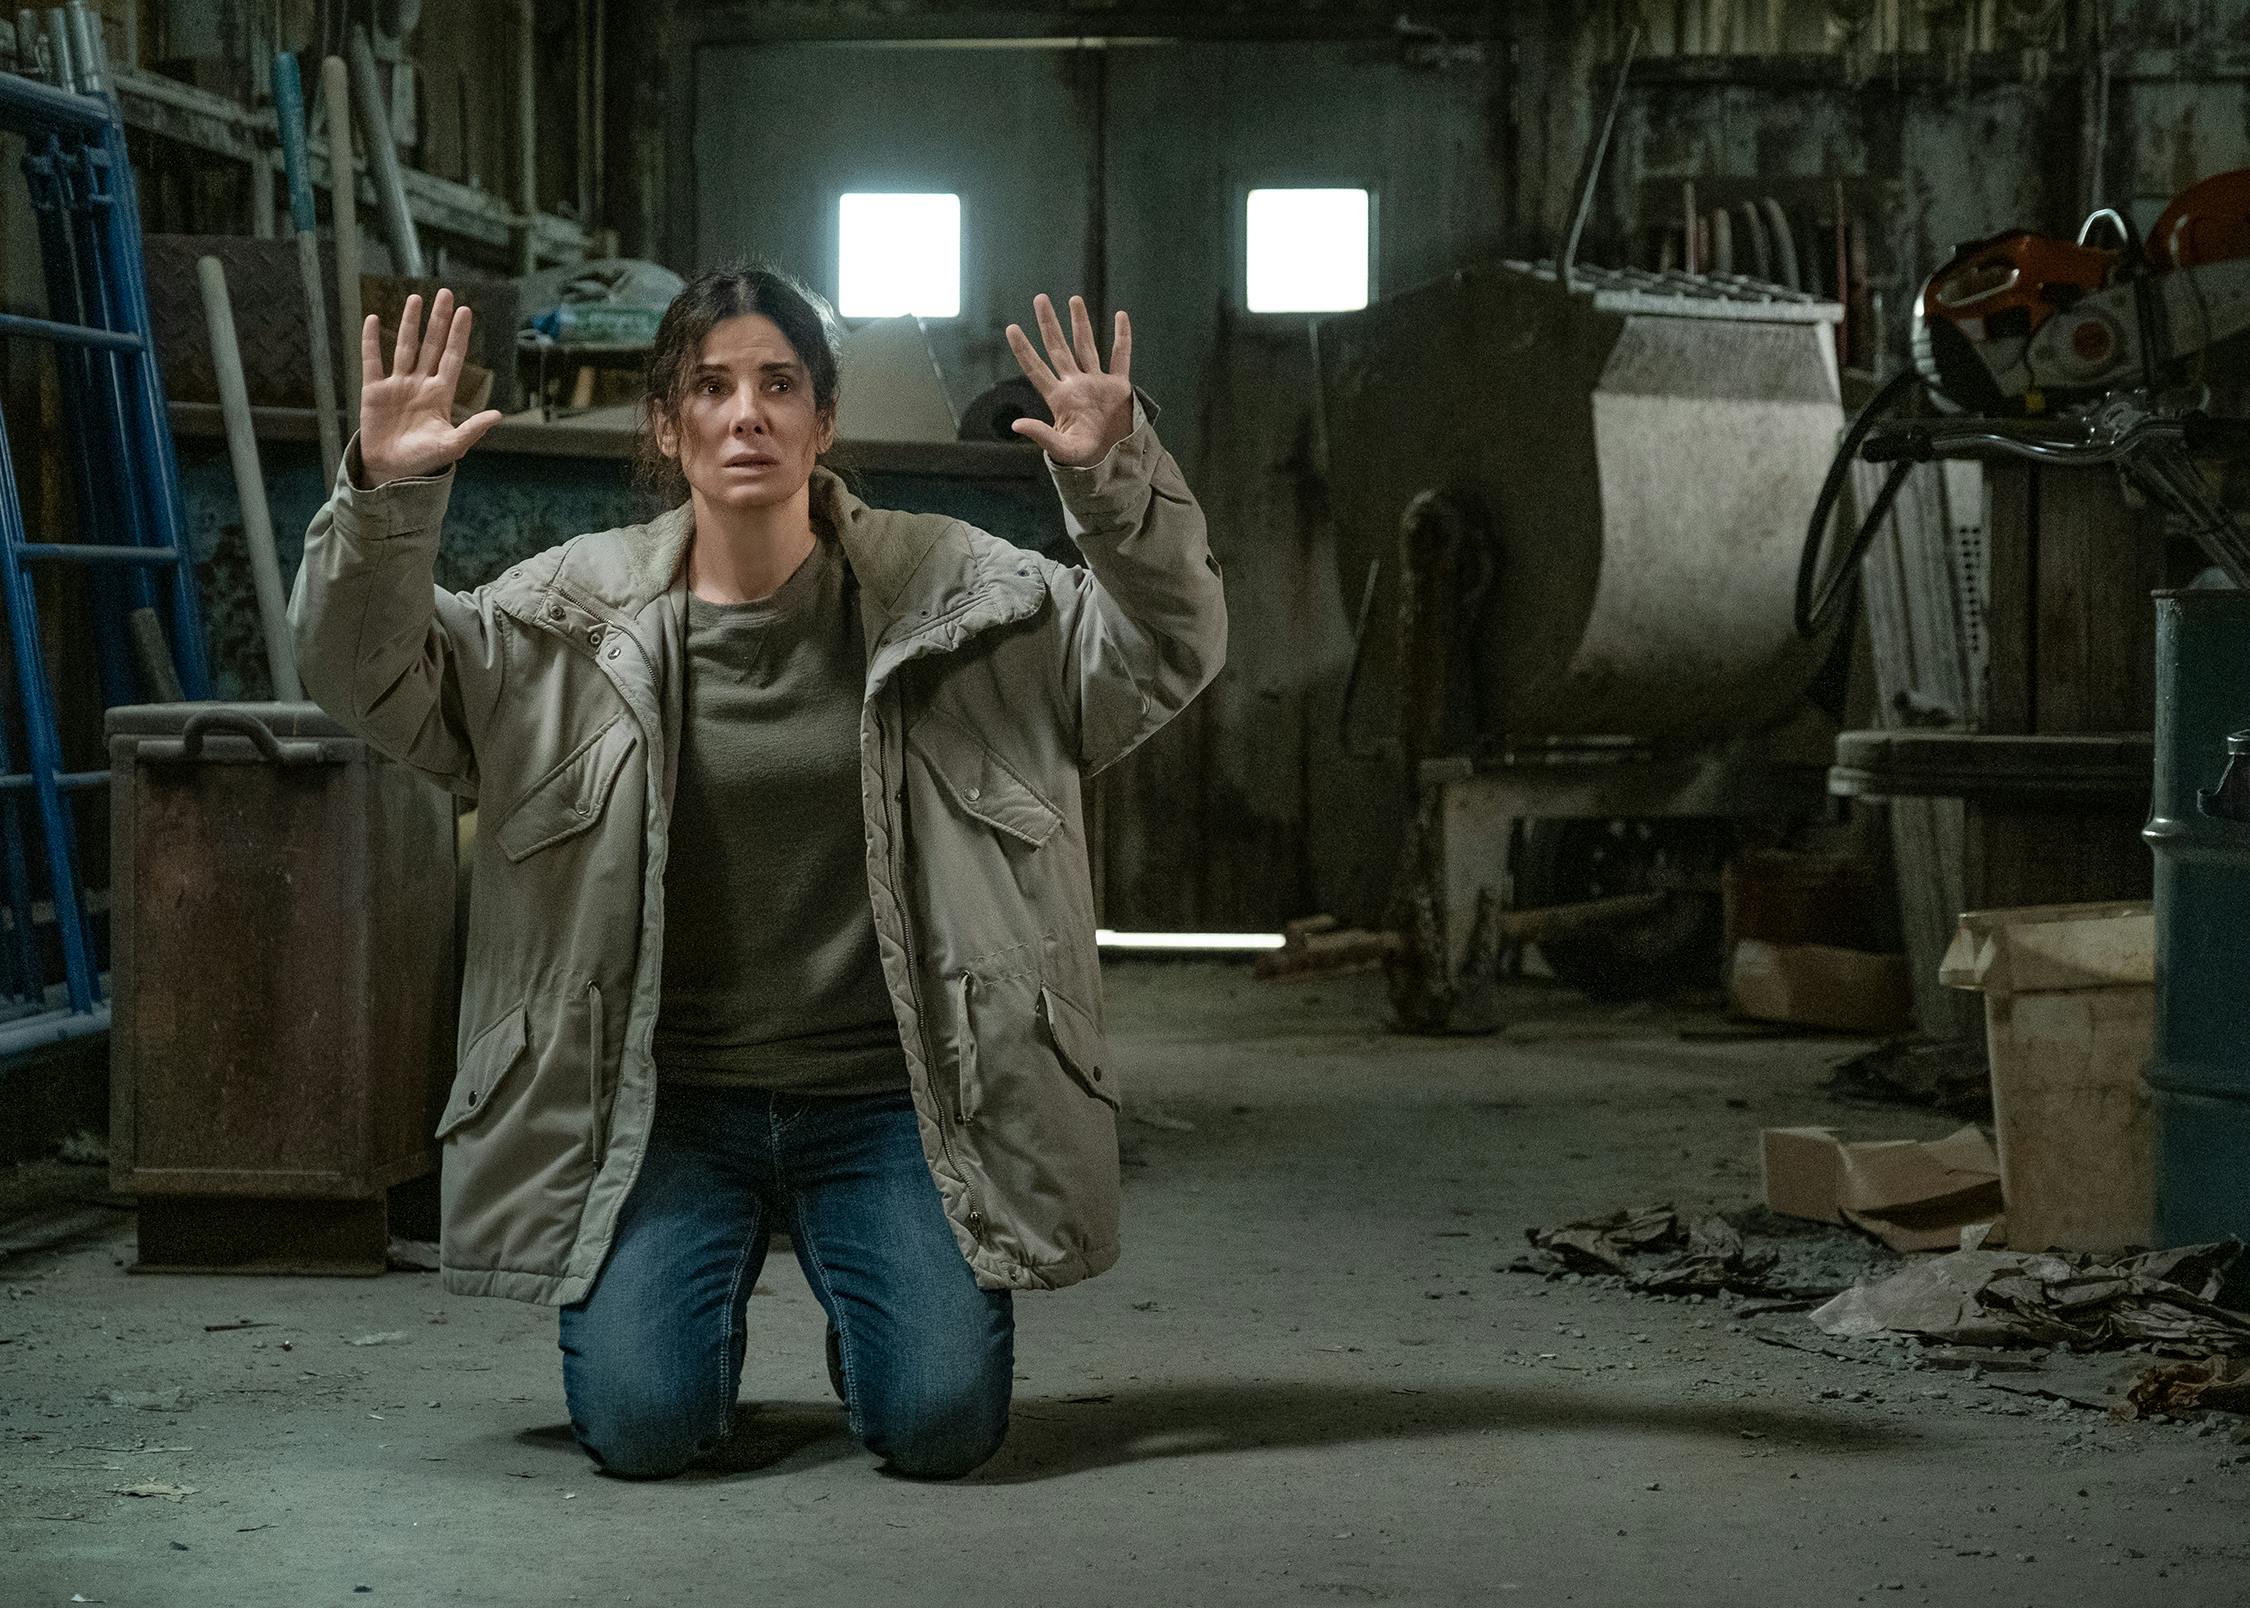 Ruth Slater (Sandra Bullock) kneels in a dusty room. She wears blue jeans, an olive shirt, and light green jacket. 